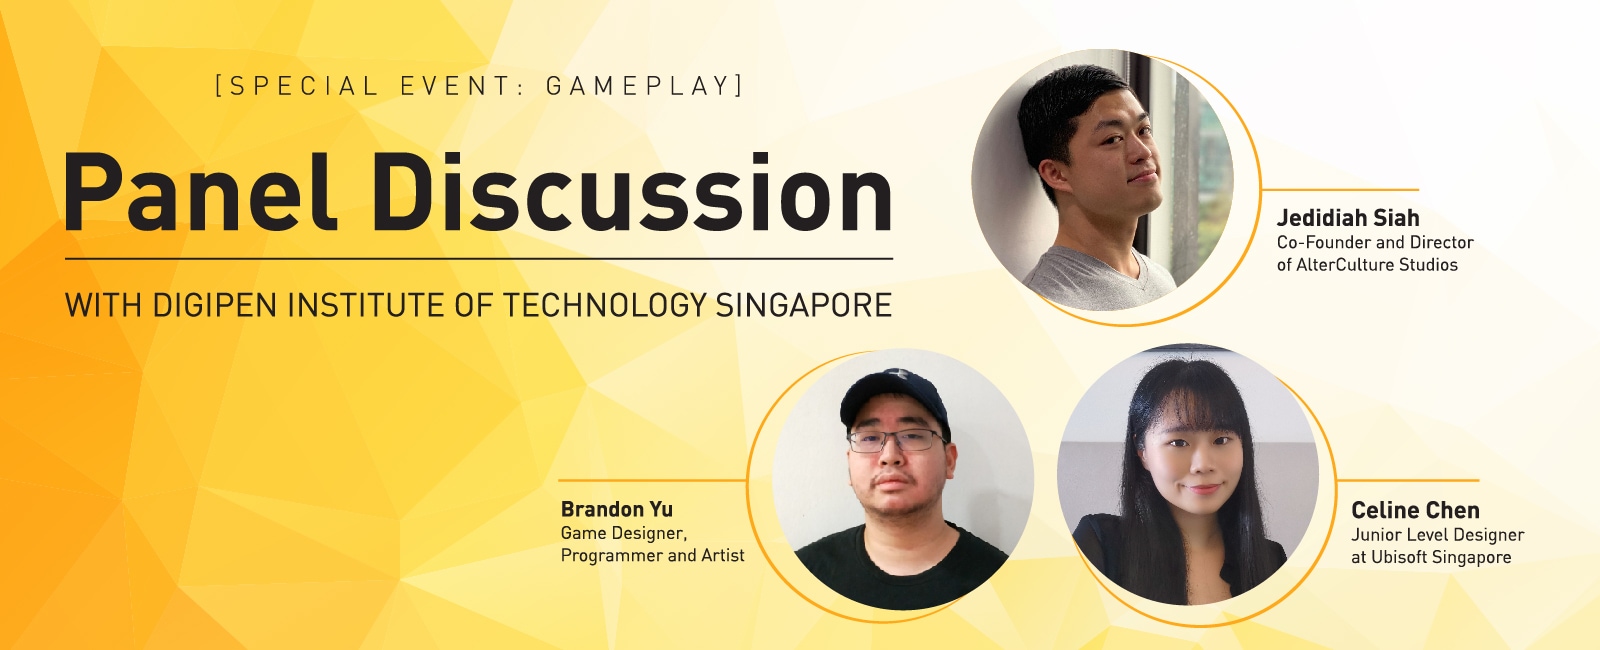 Panel Discussion with DigiPen Institute of Technology Singapore Alumni